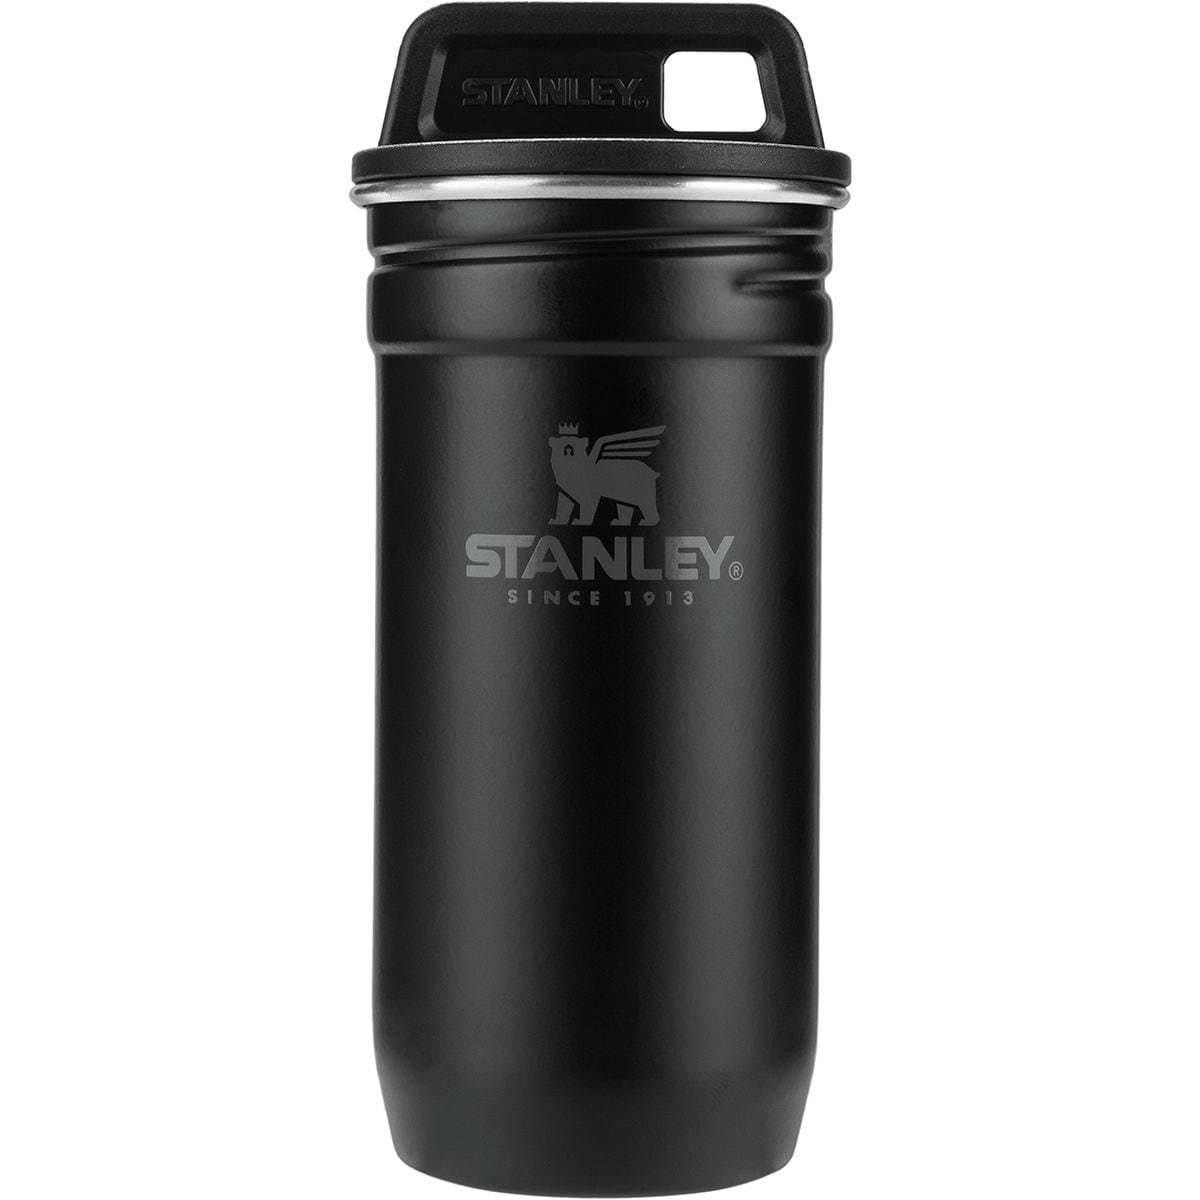 Stanley The Pre Party Shot Glass And Flask Set - Hammertone Lake - Set of  4-2OZ/59mL 8OZ / .23L